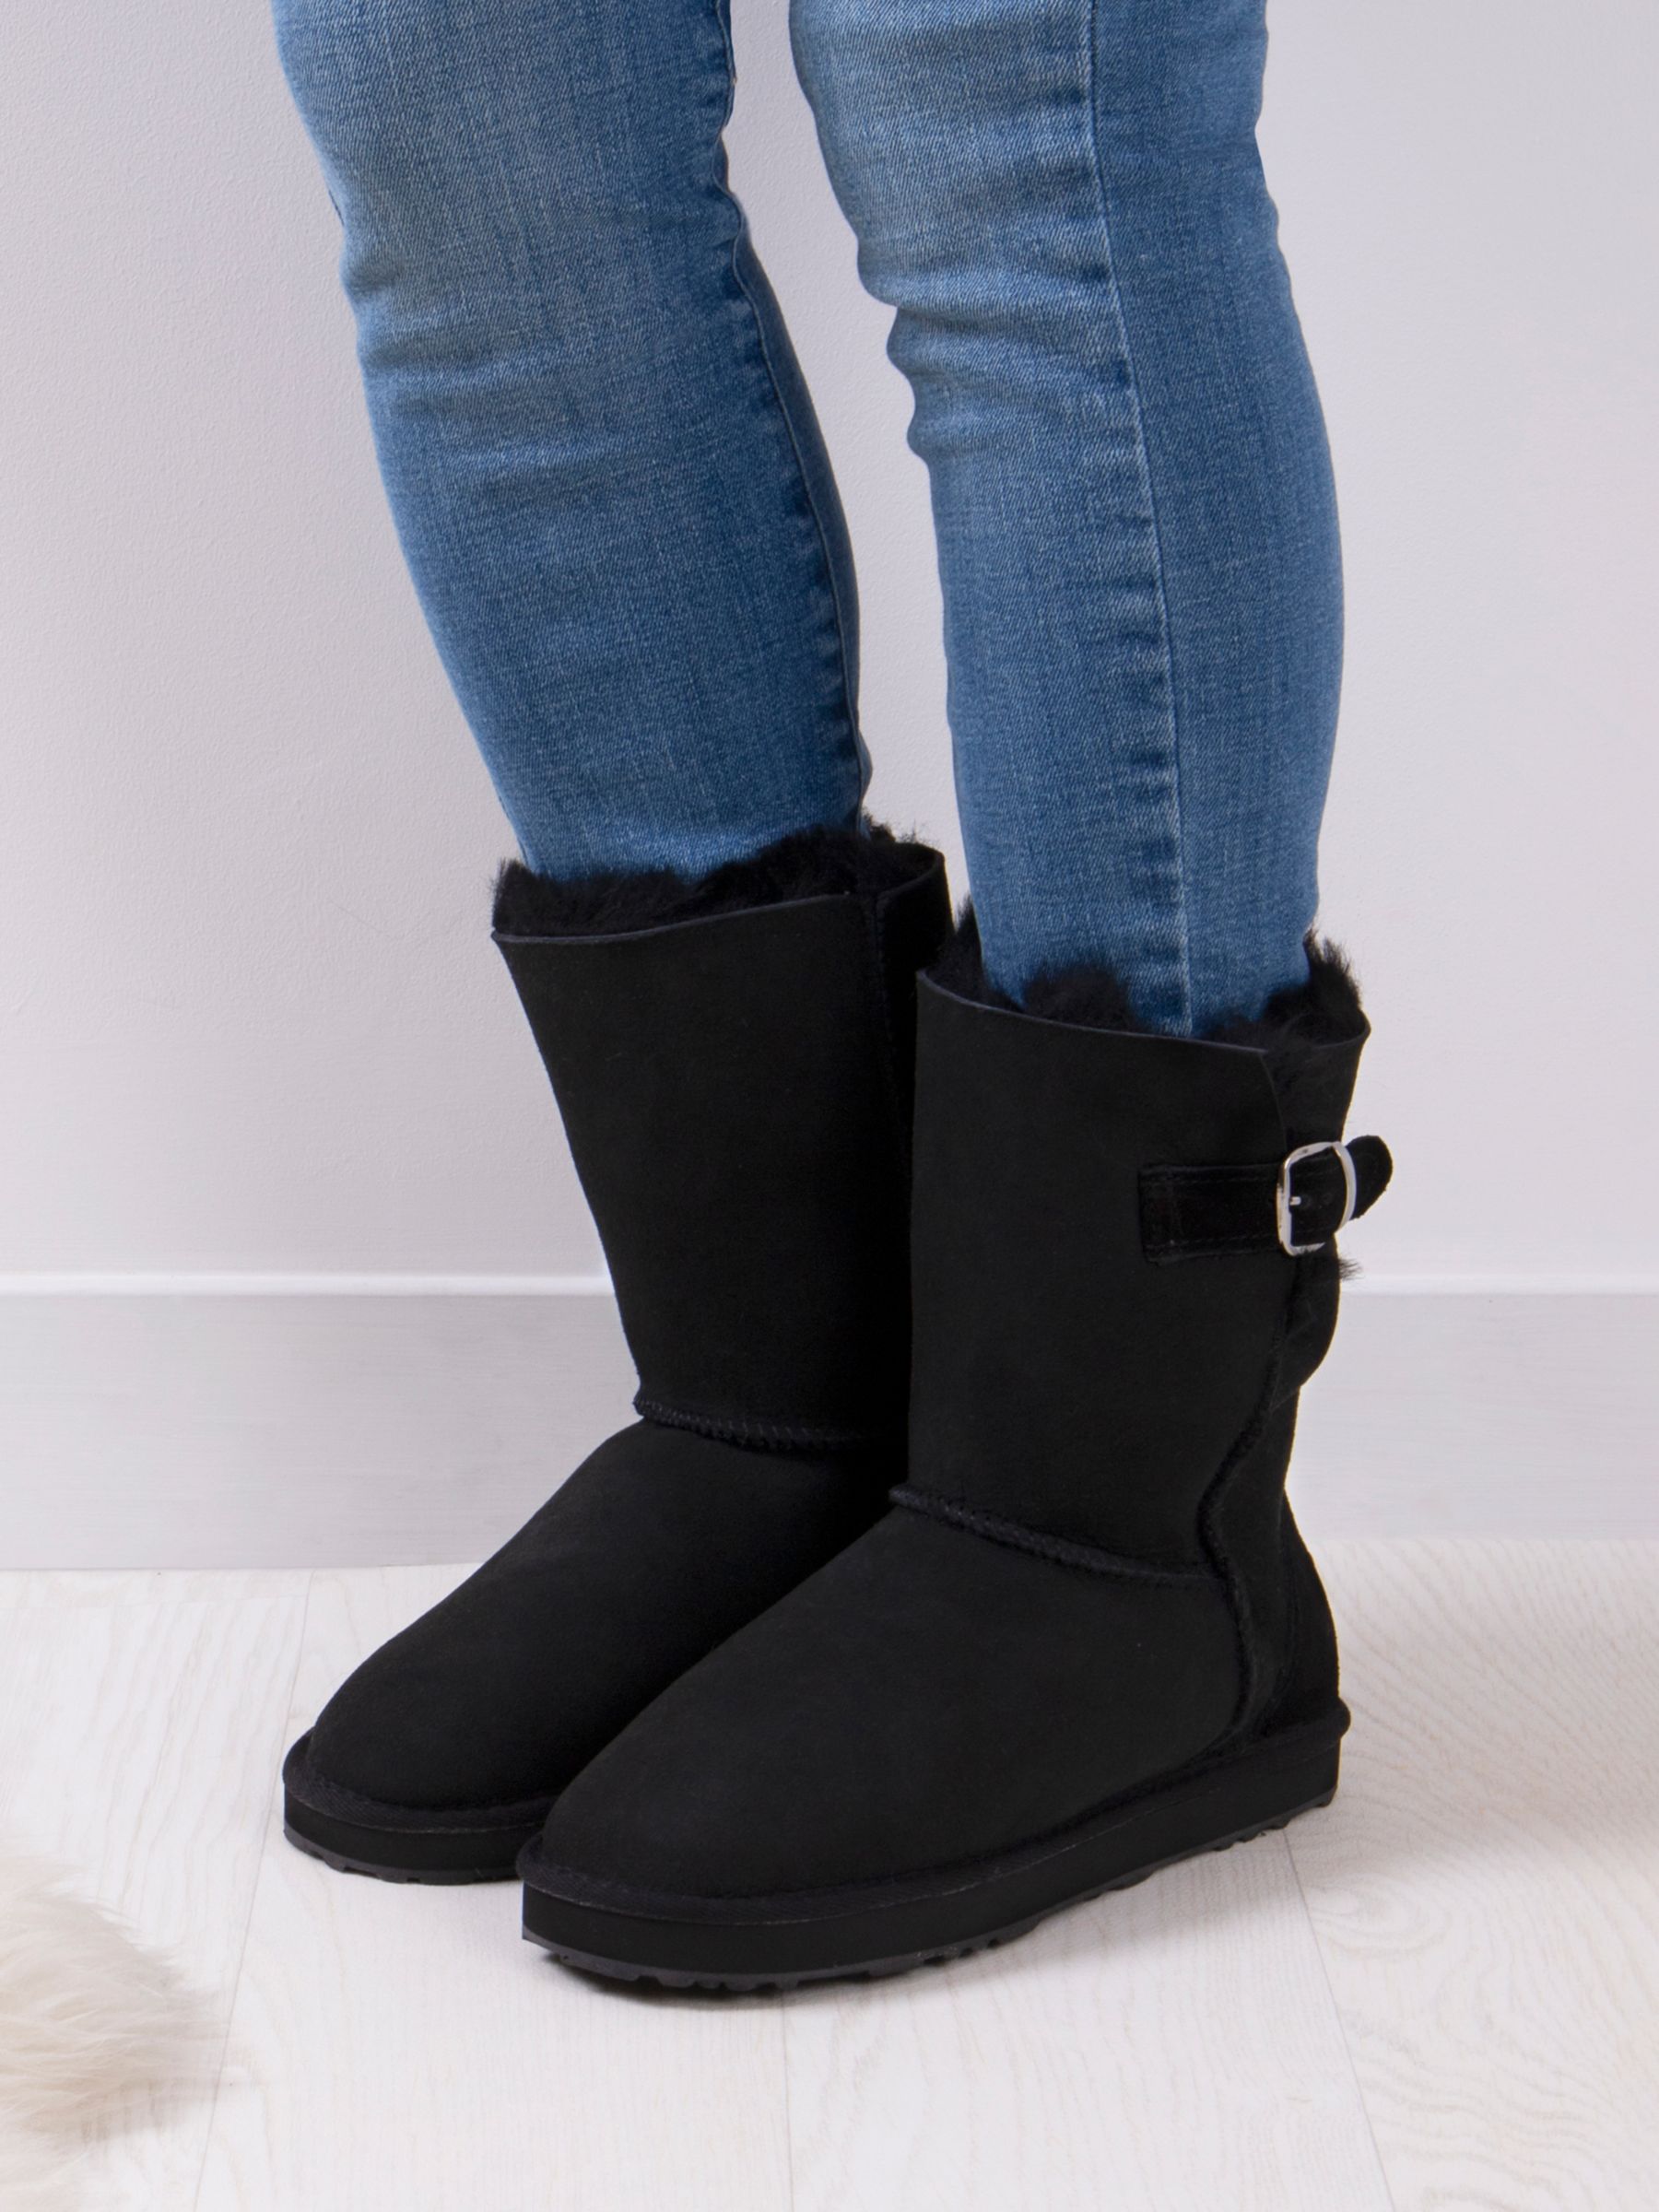 Just Sheepskin Surrey Suede Ankle Boots, Black at John Lewis & Partners